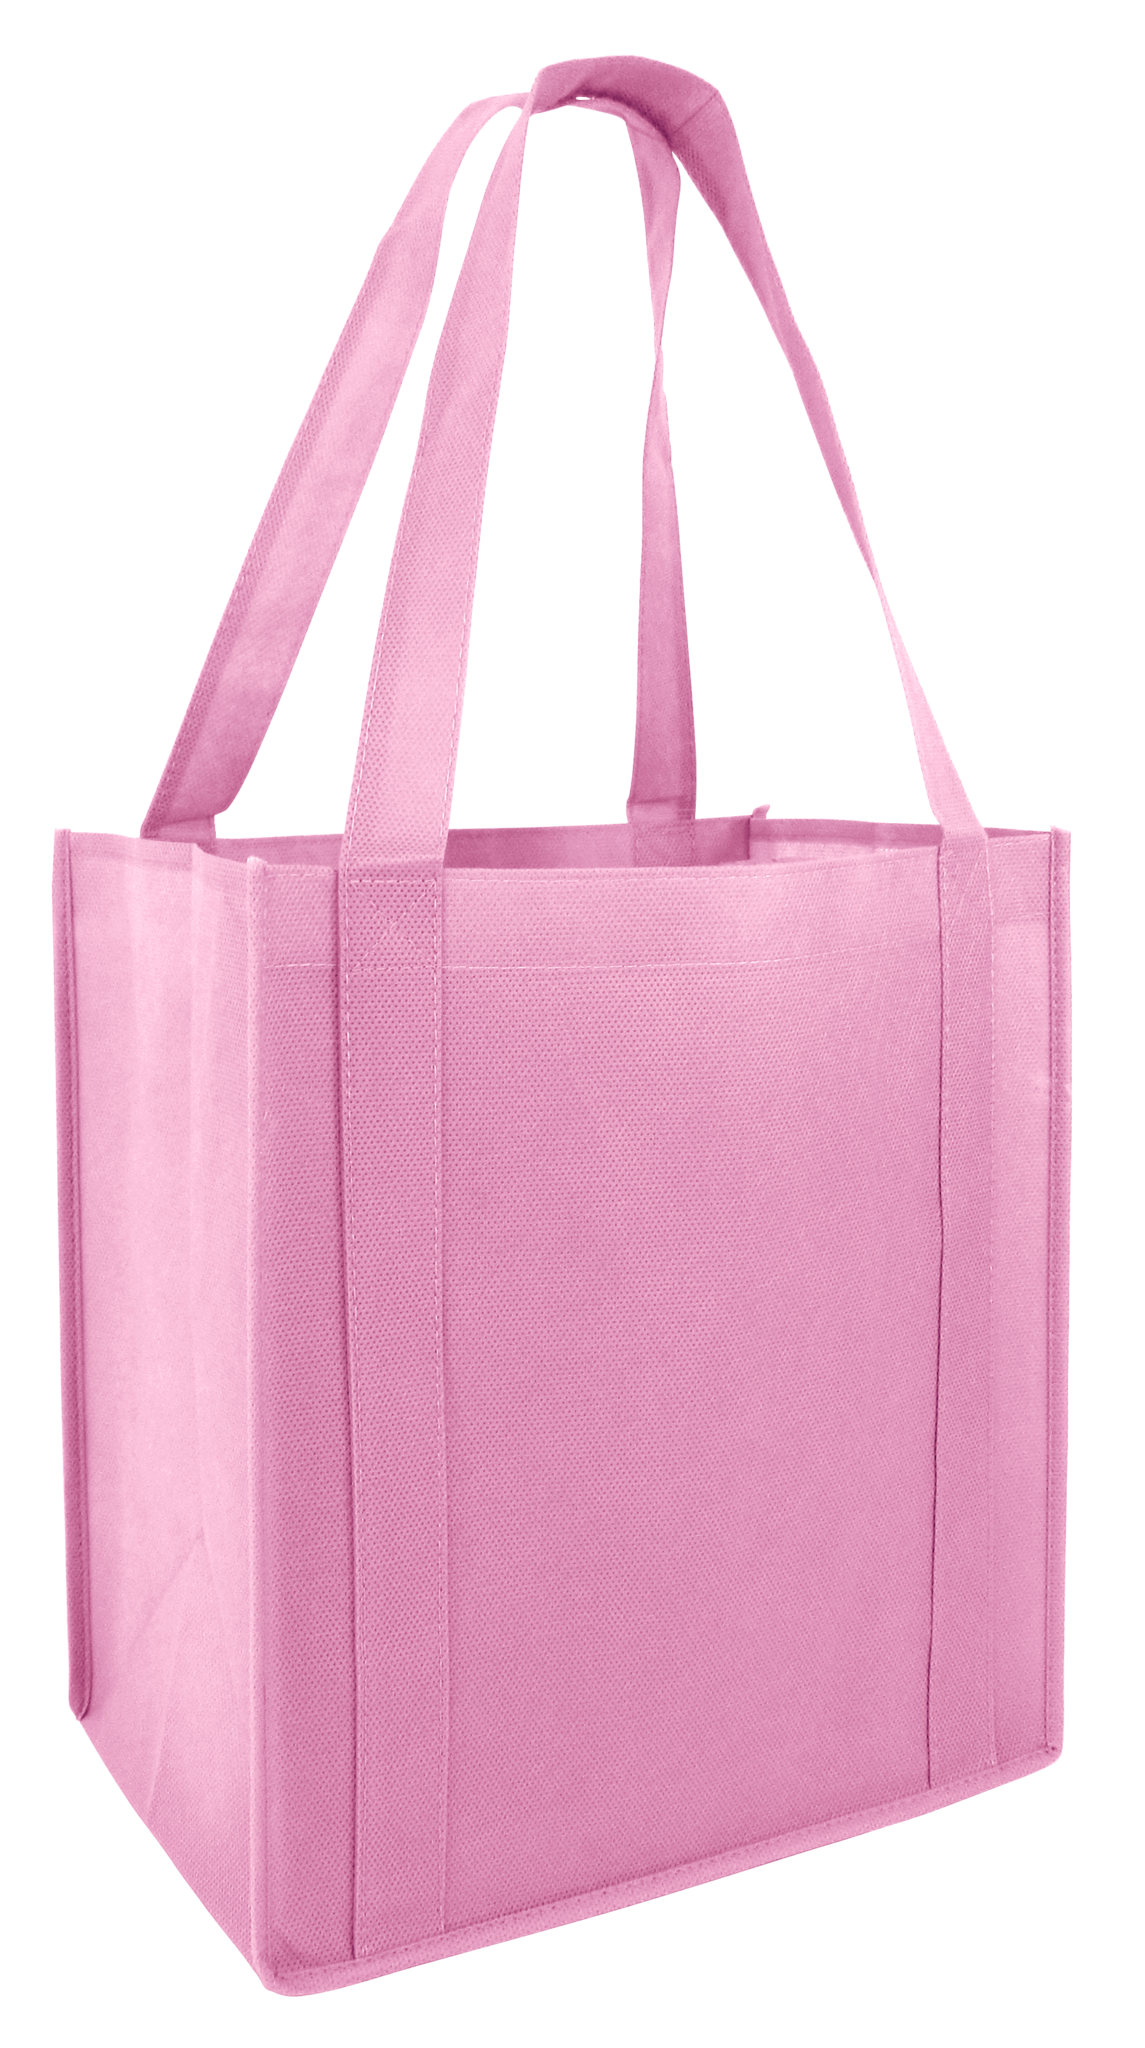 Cheap Grocery Shopping Tote Bag pink